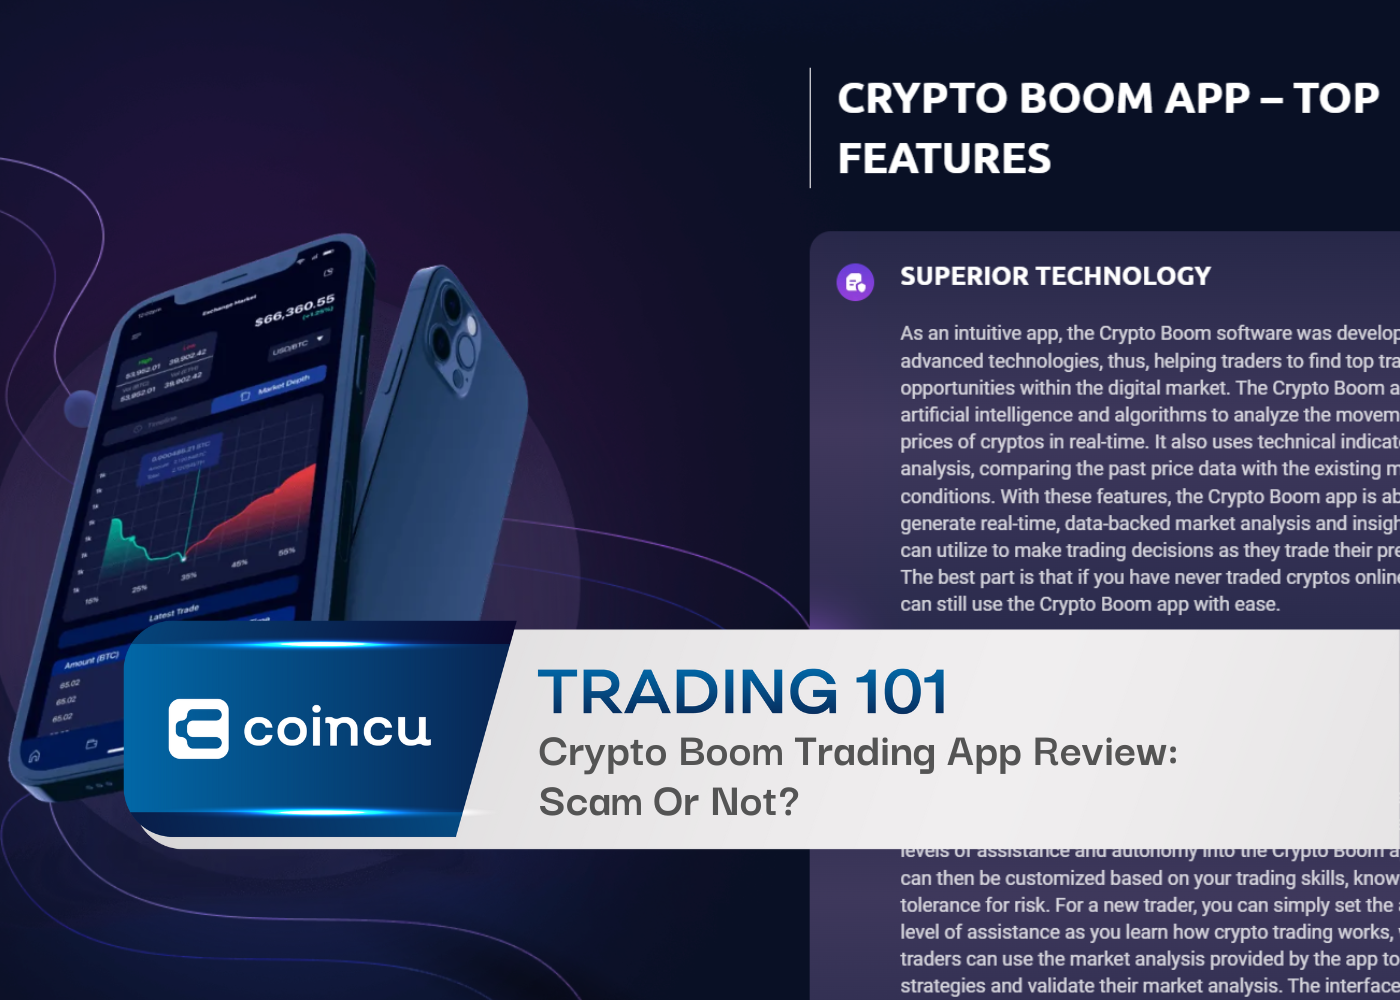 Crypto Boom Trading App Review: Scam Or Not?